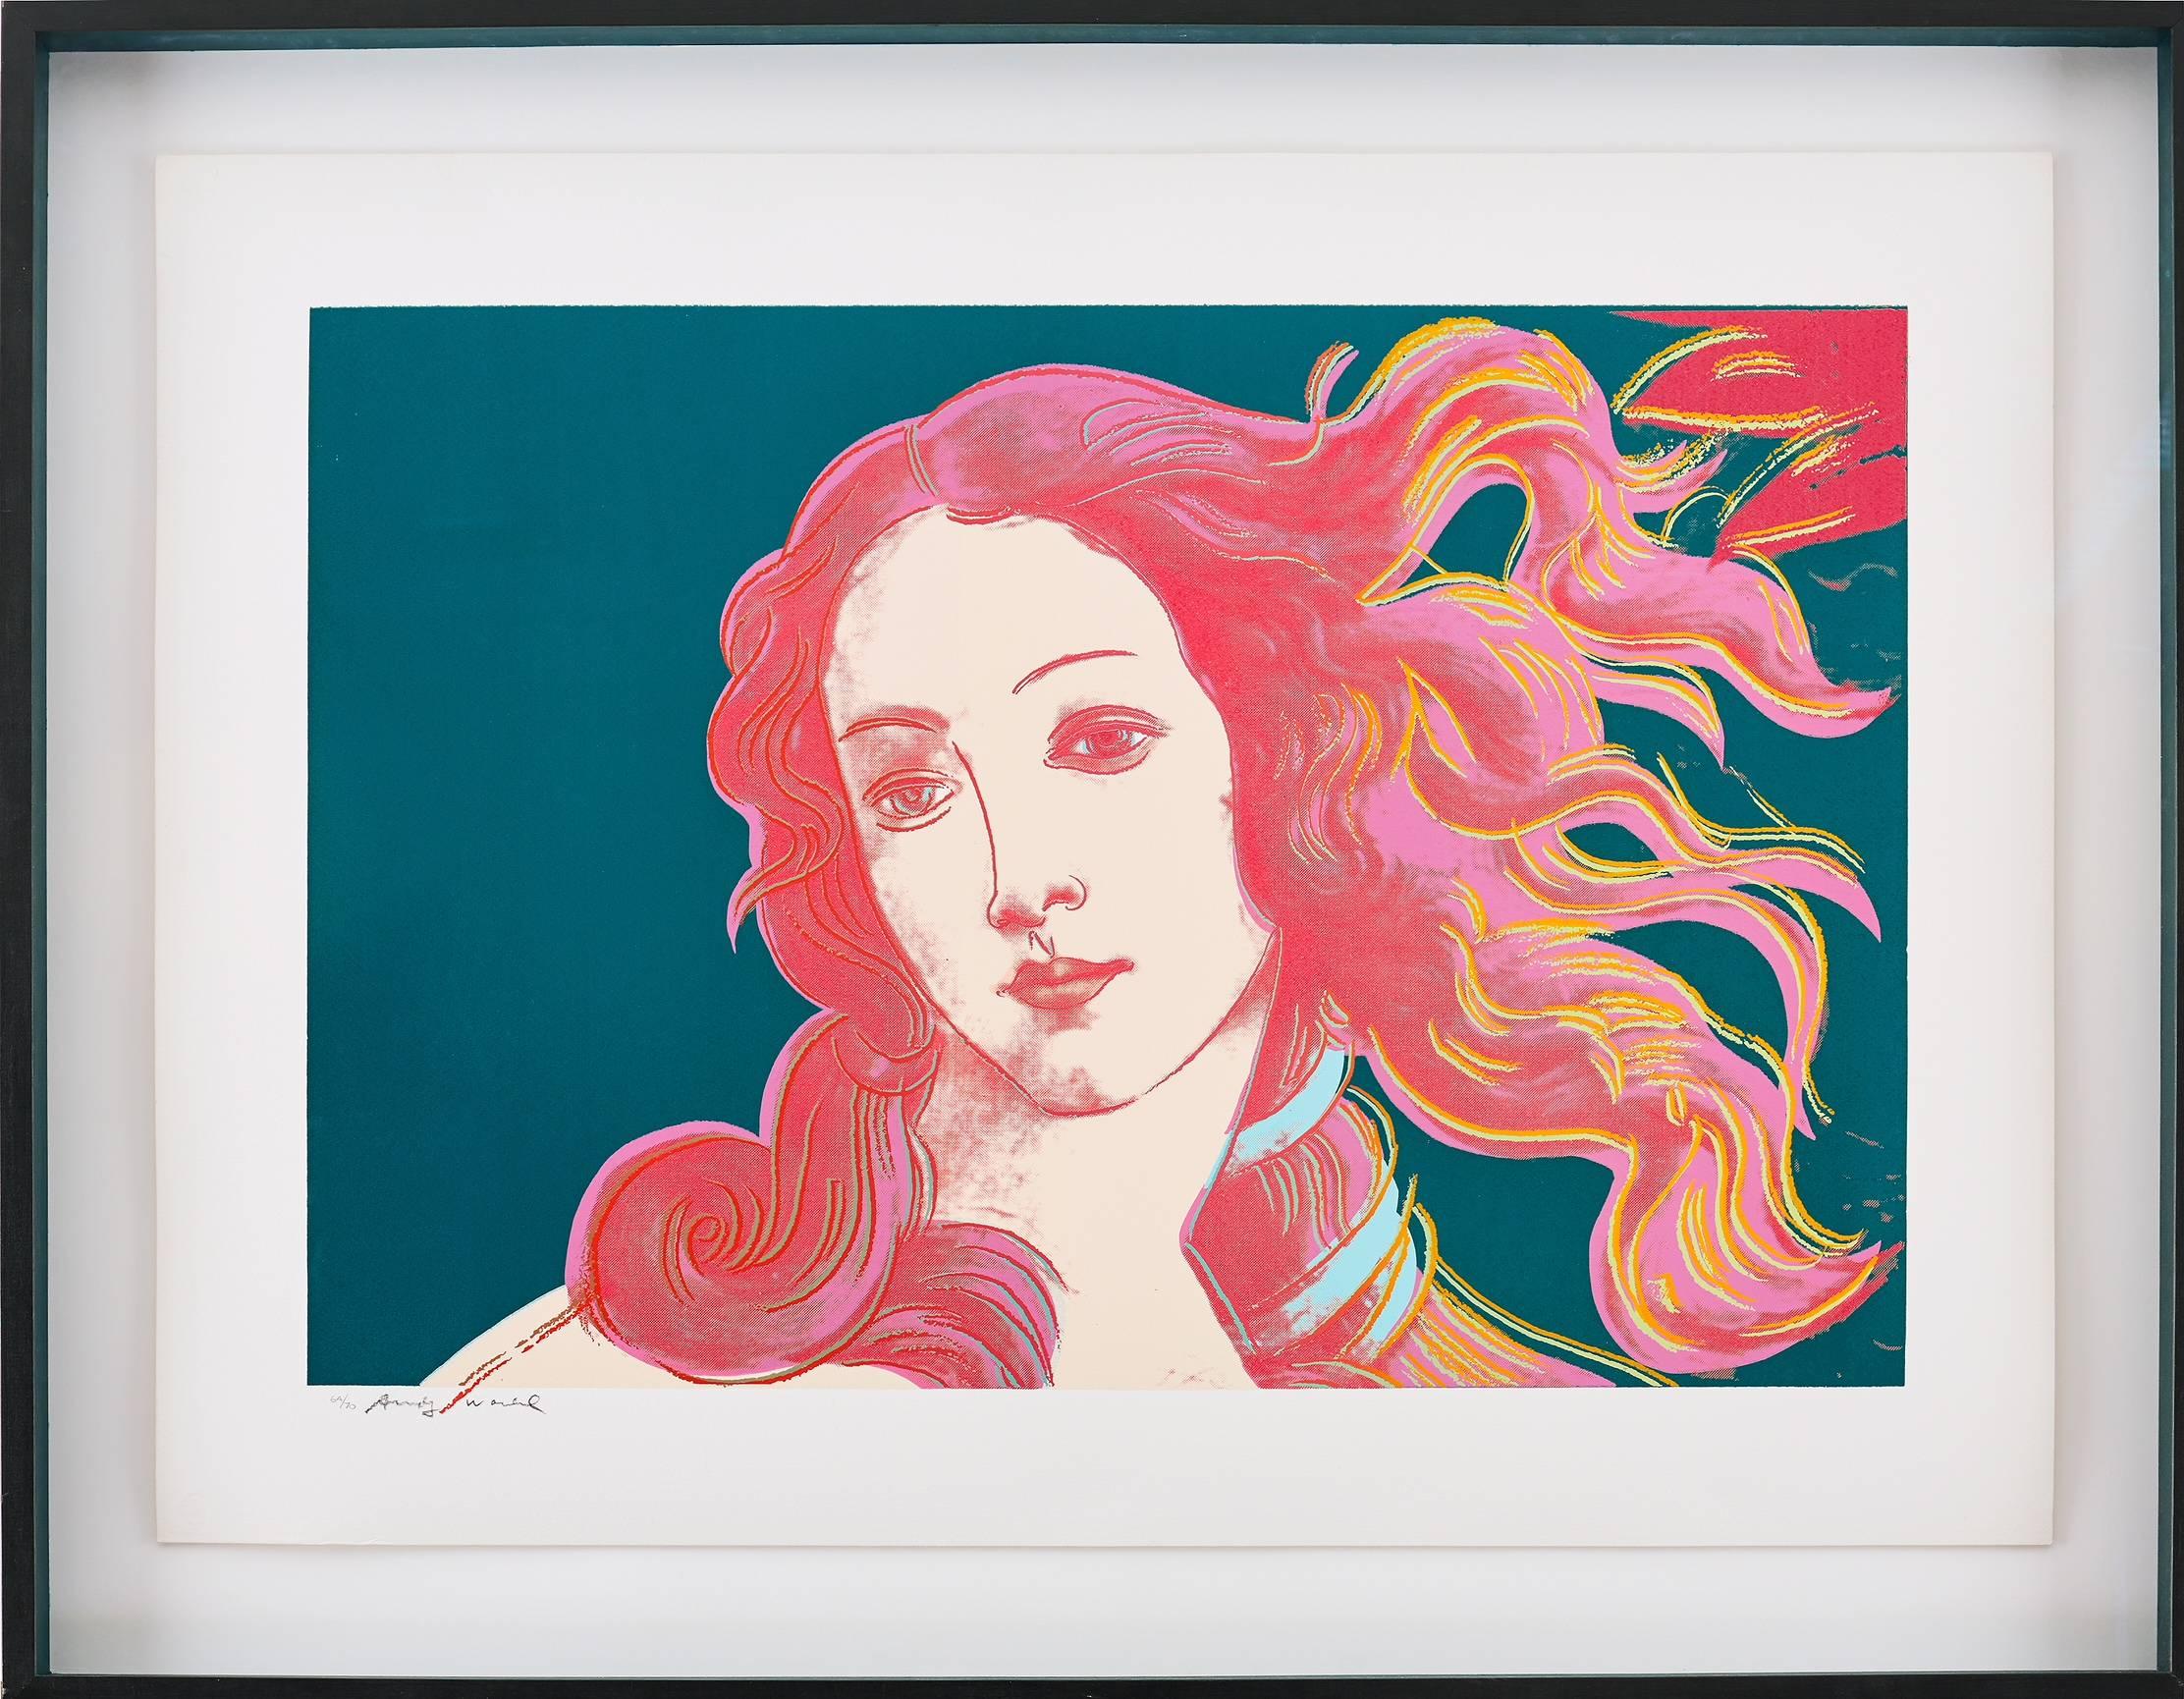 Details of Renaissance Paintings (Sandro Botticelli, Birth of Venus) F&S II.316 - Print by Andy Warhol